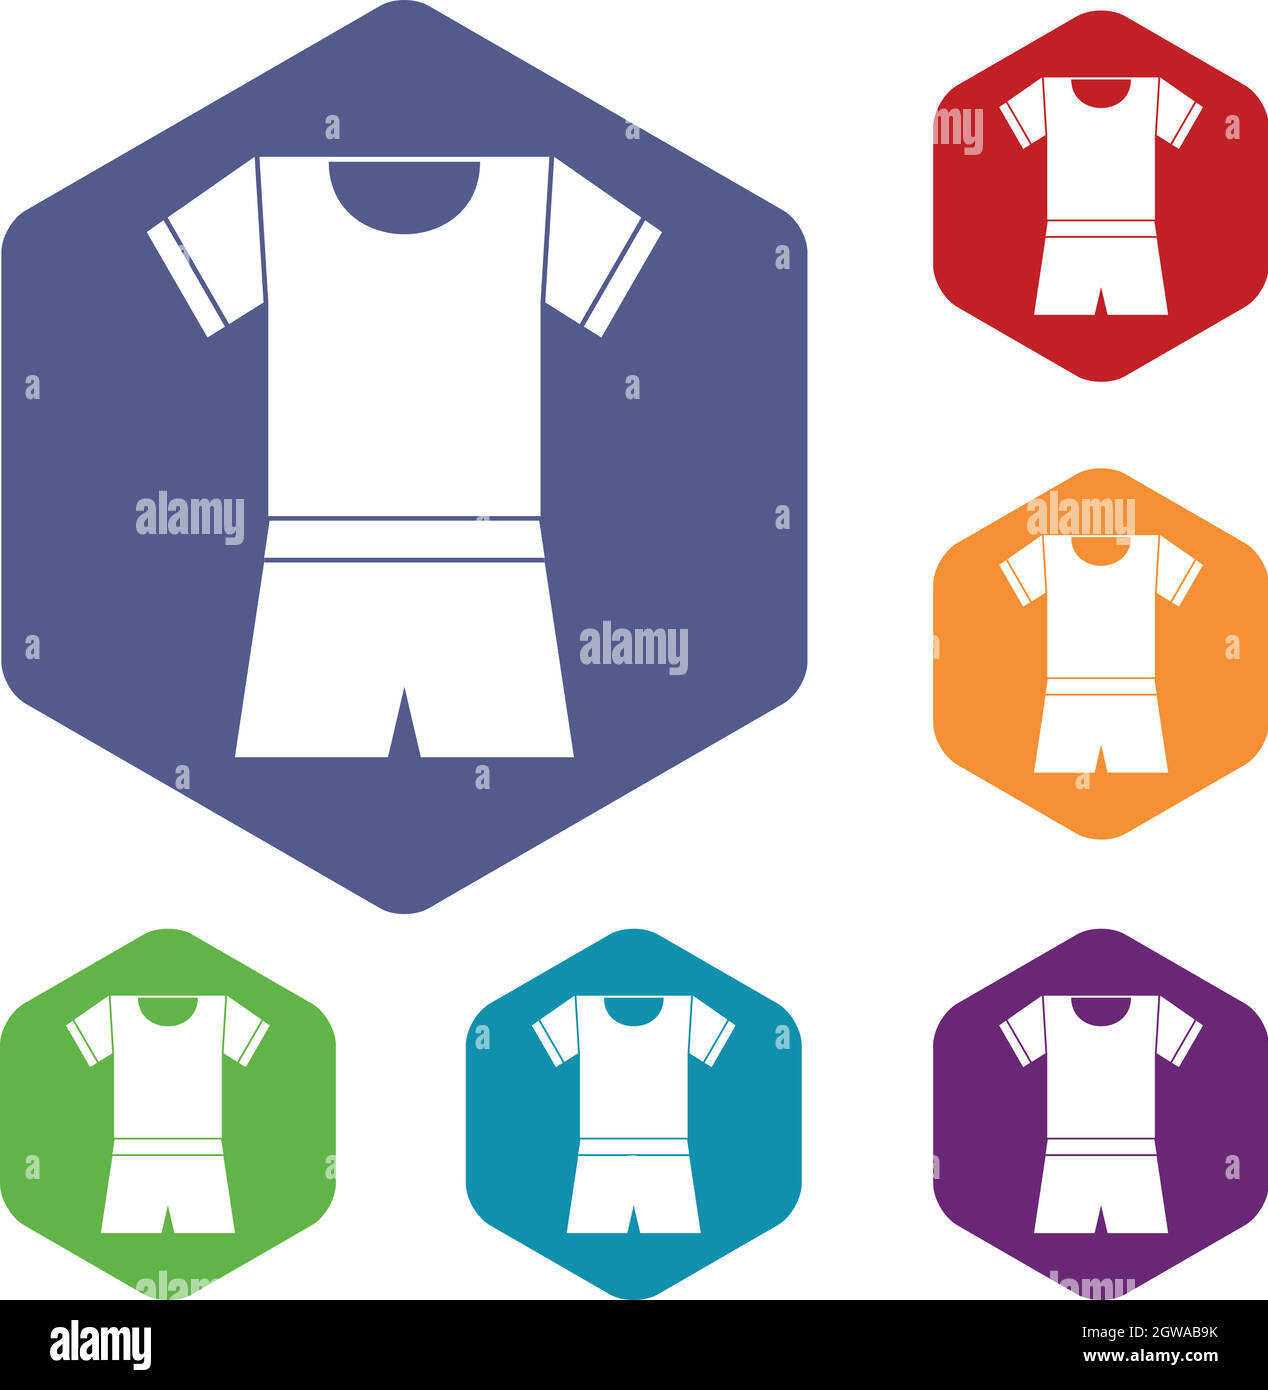 Sport shirt and shorts icons set Stock Vector